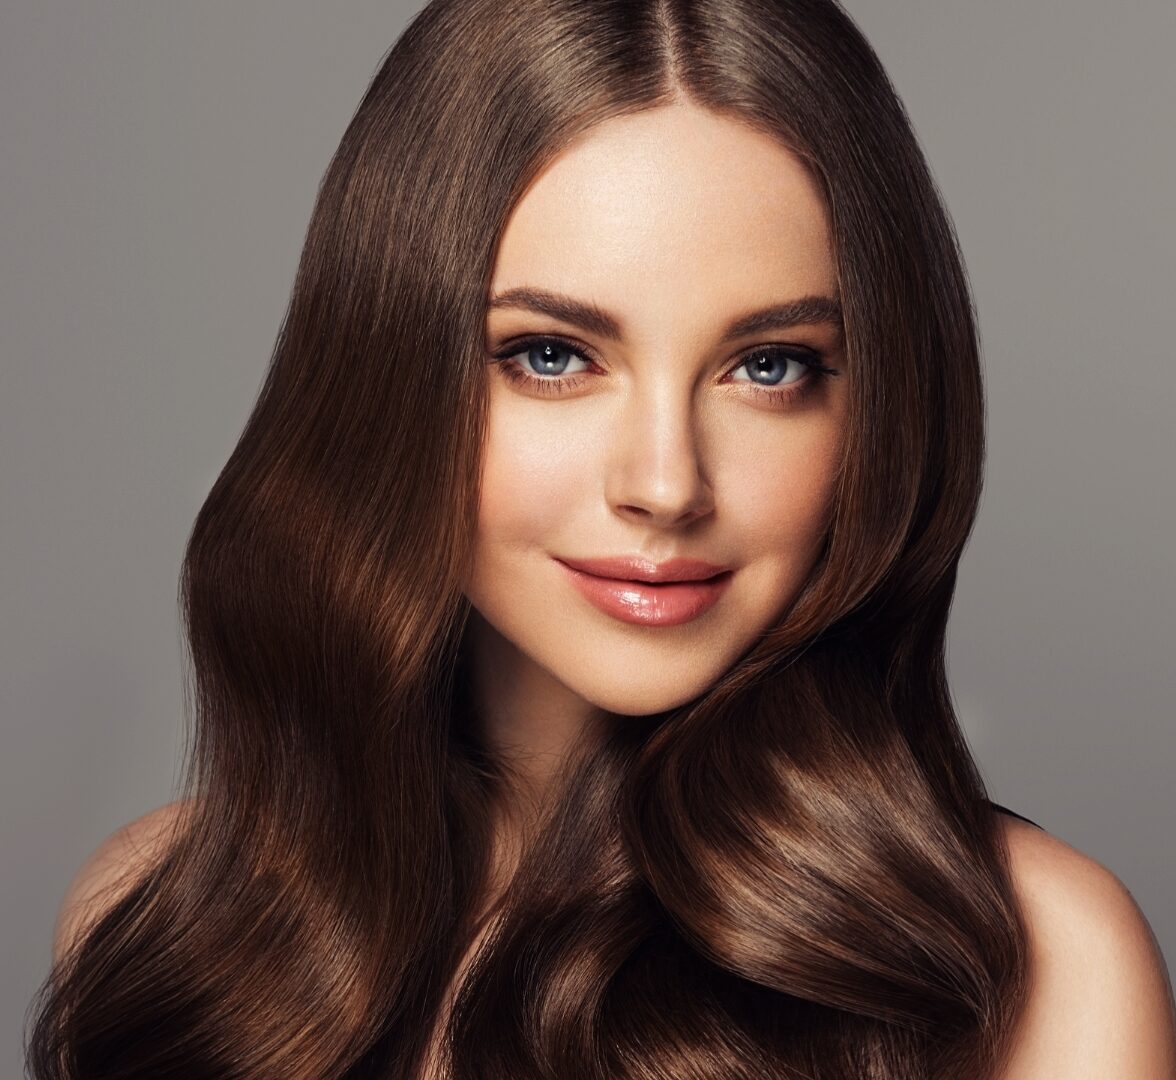 Human Hair Exporters in Chennai, India, Wholesale Human Hair Suppliers in  India, Remy Hair